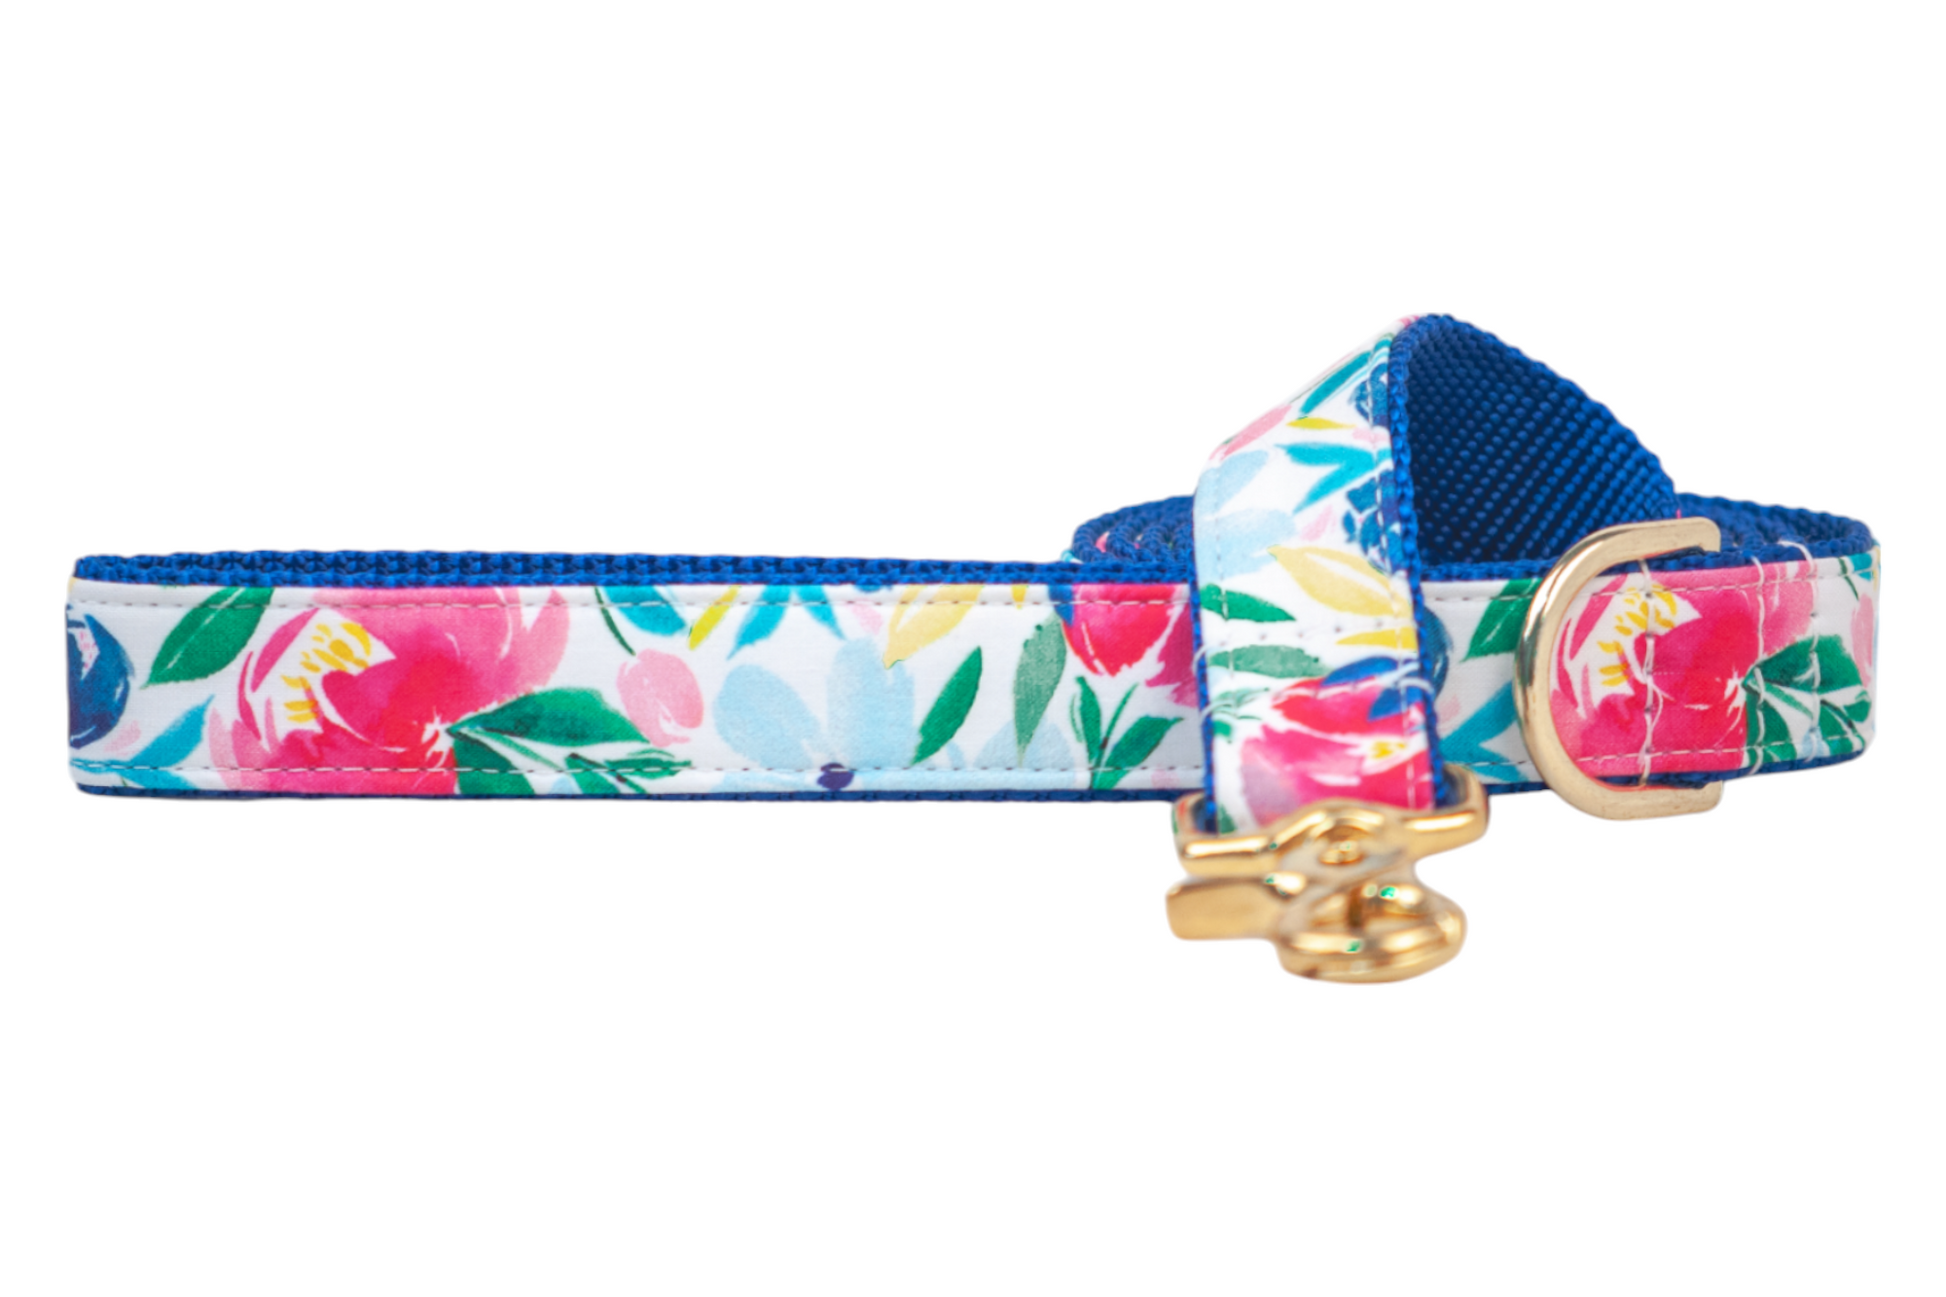 Floral Gallery Dog Leash - Crew LaLa